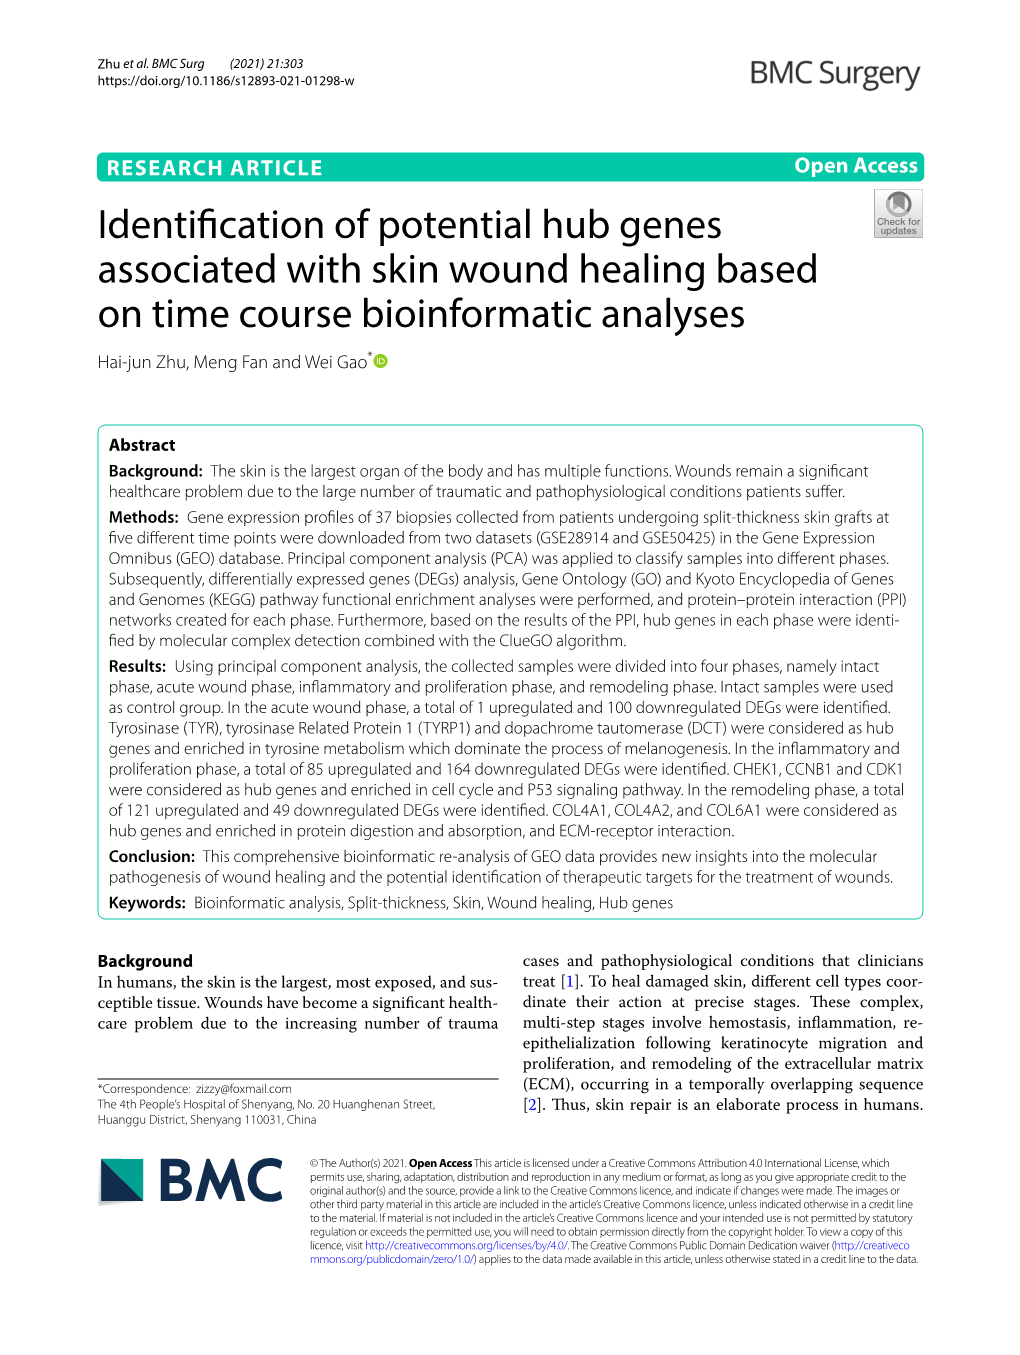 Identification of Potential Hub Genes Associated with Skin Wound Healing